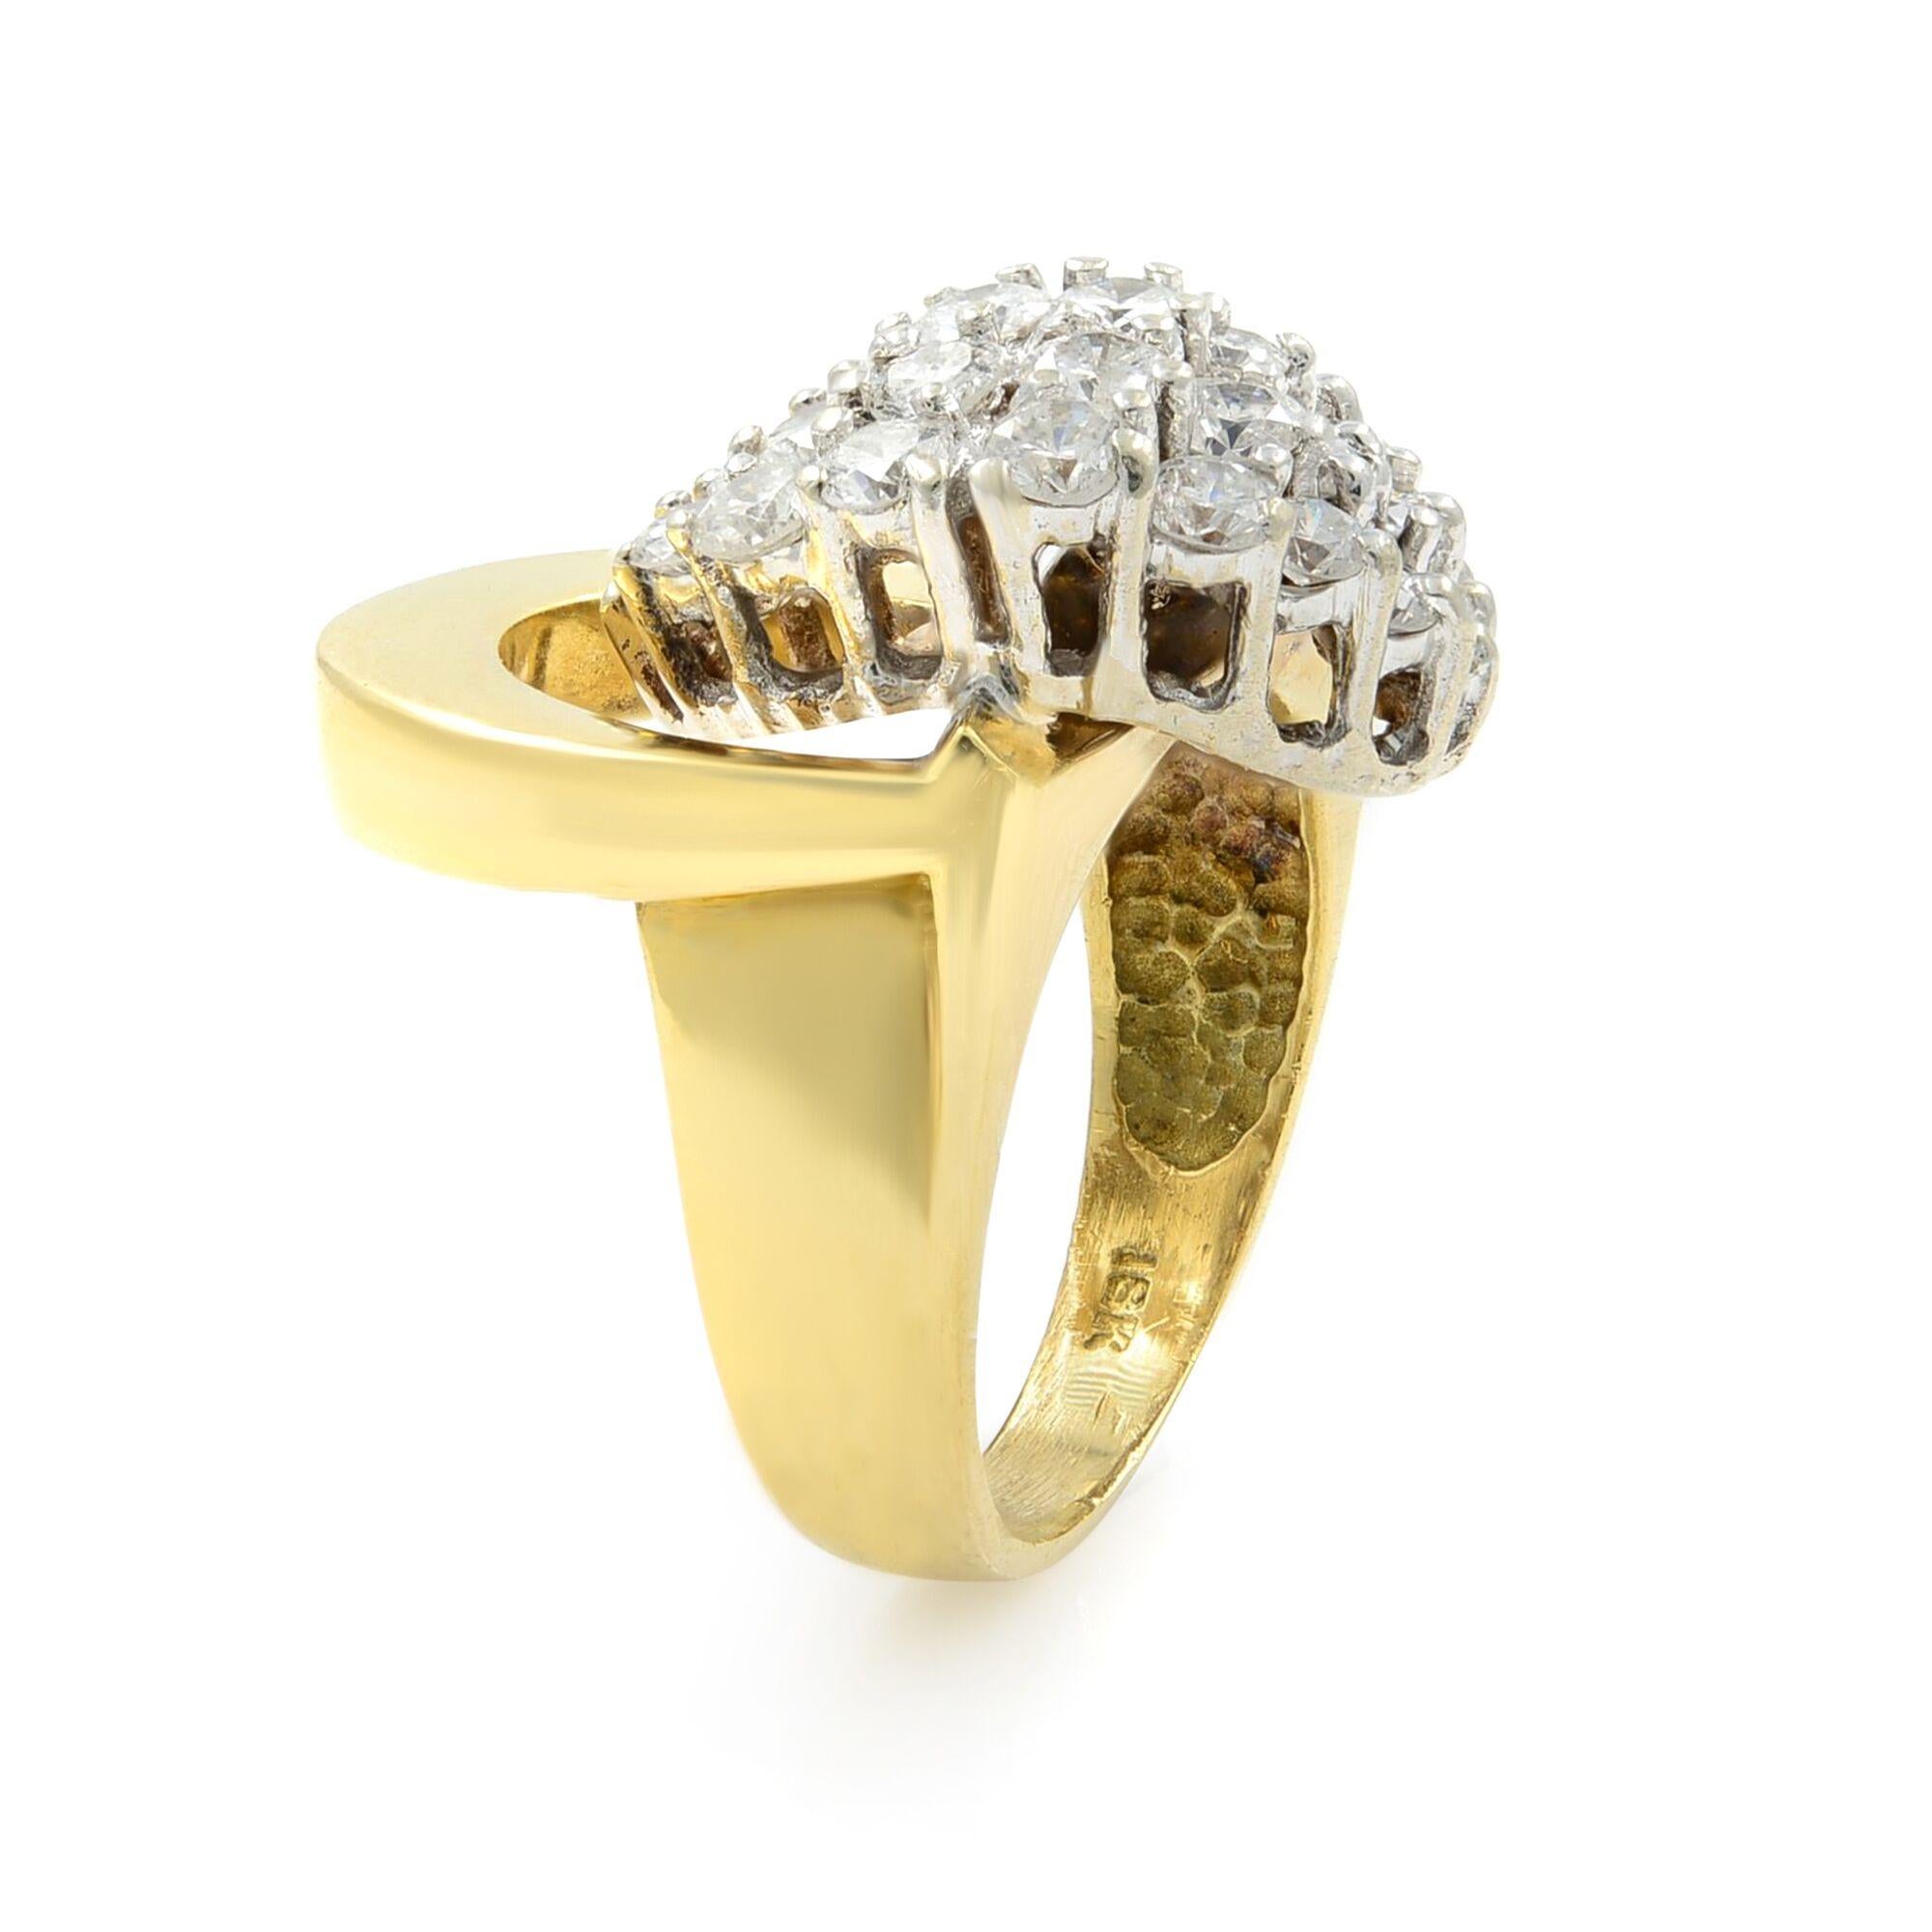 Vintage Round Cut Diamond Cocktail Ring 18K Yellow Gold 1.65Cttw For Sale 1